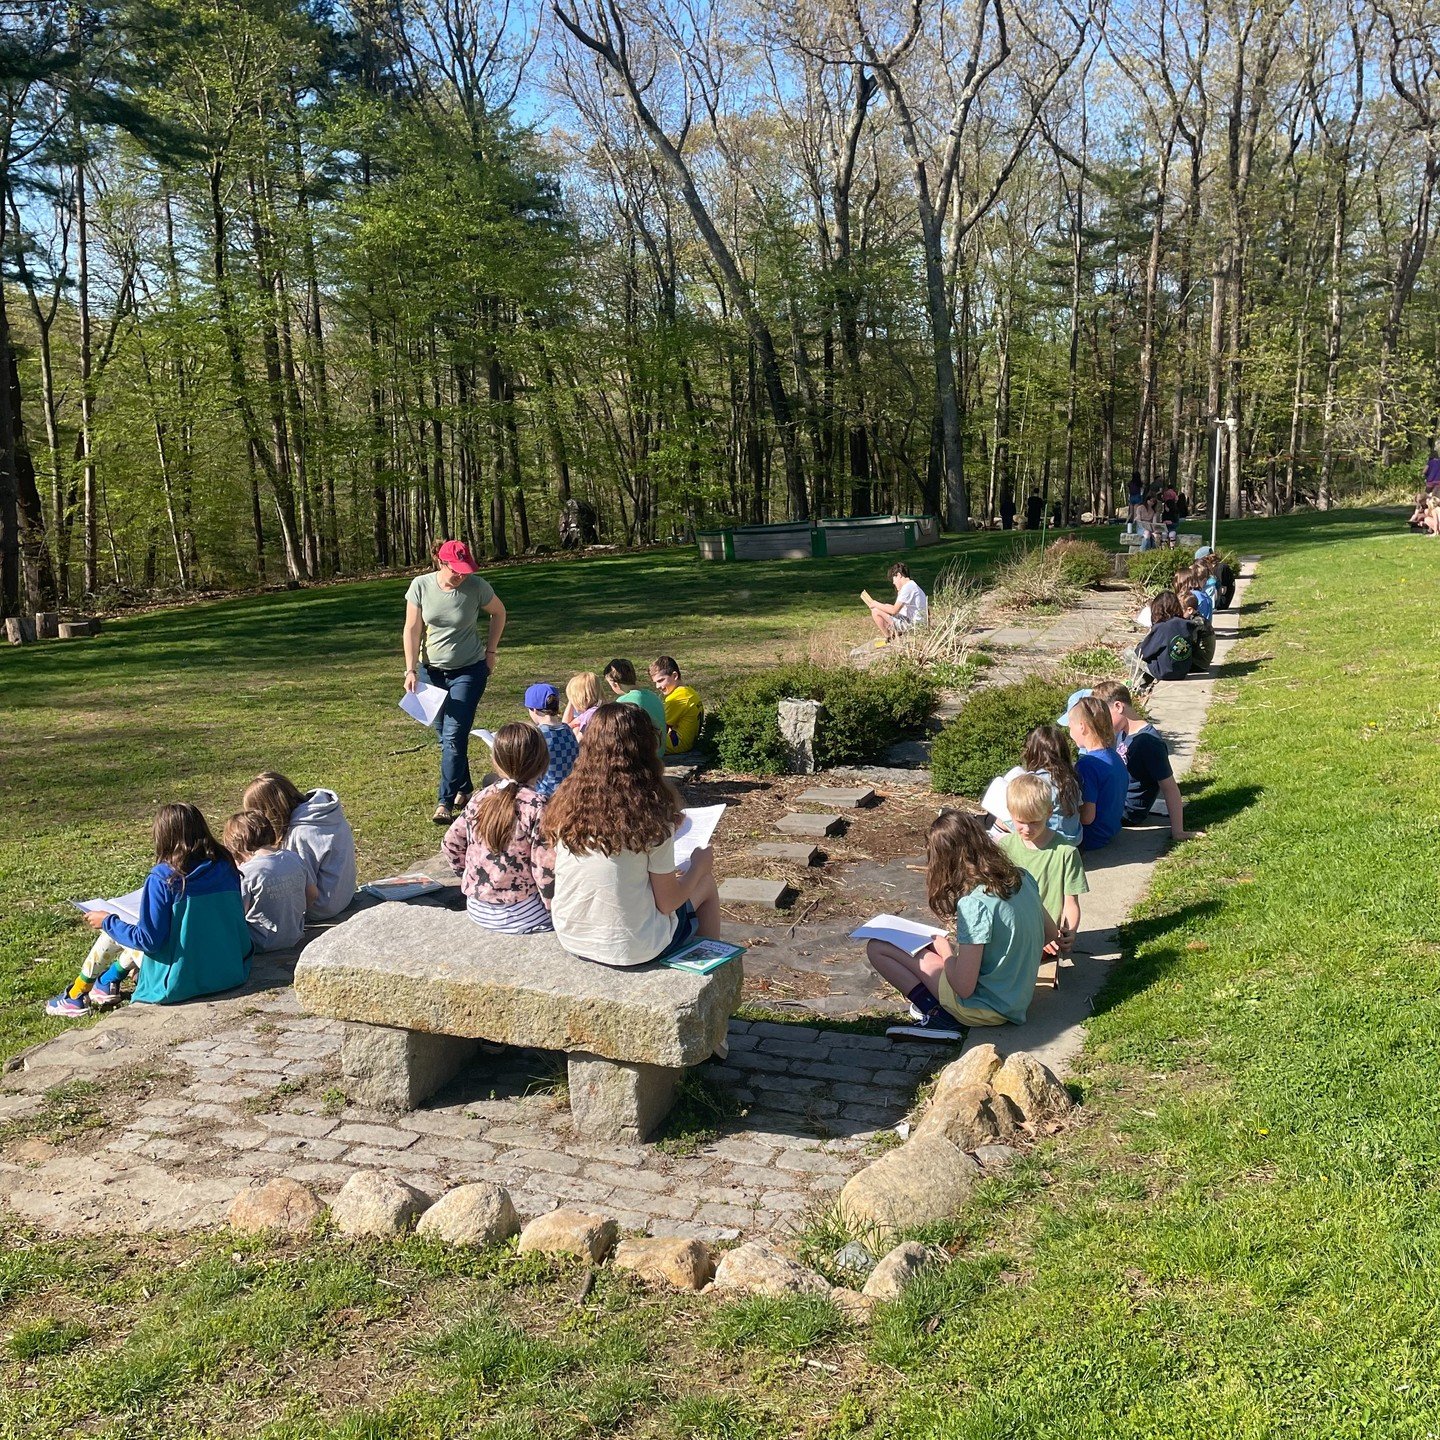 It was a glorious morning for Reading Buddies outside at Birches! Older students read to their buddies every week in this beloved Birches tradition.❤️